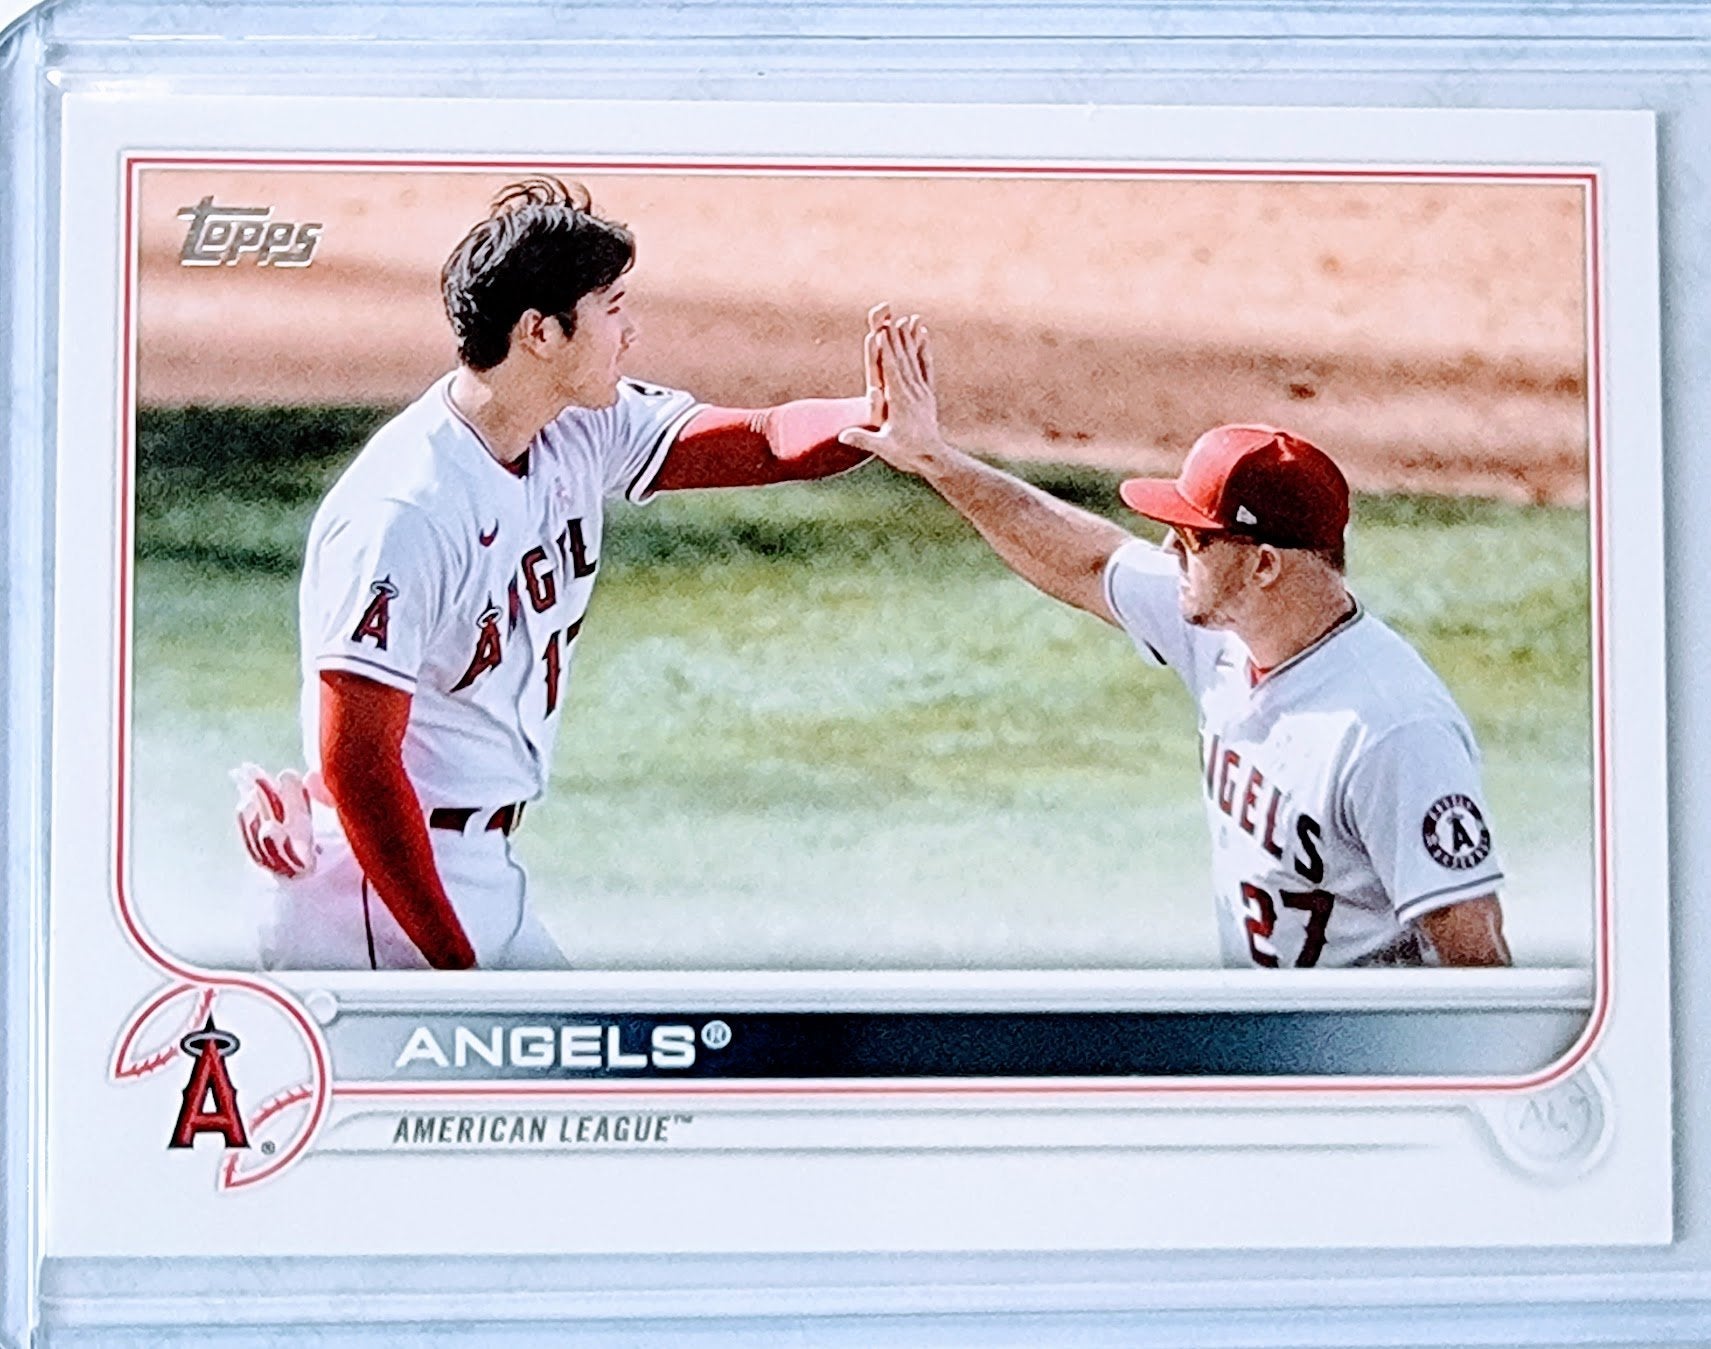 2022 Topps Angels Team Card Baseball Trading Card GRB1 simple Xclusive Collectibles   